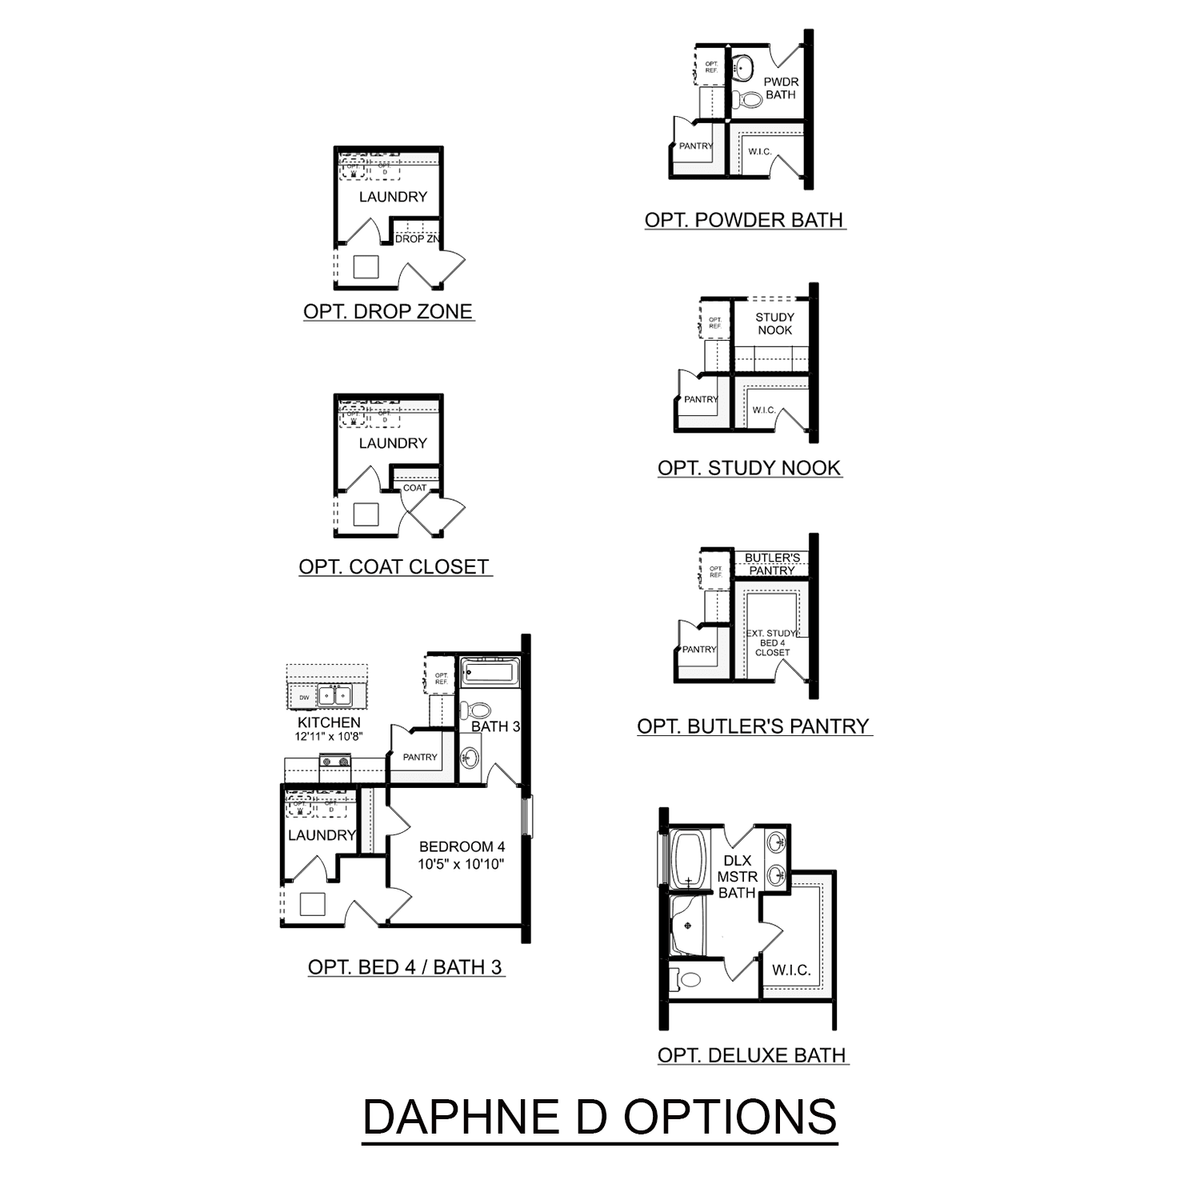 2 - The Daphne D buildable floor plan layout in Davidson Homes' Spragins Cove community.